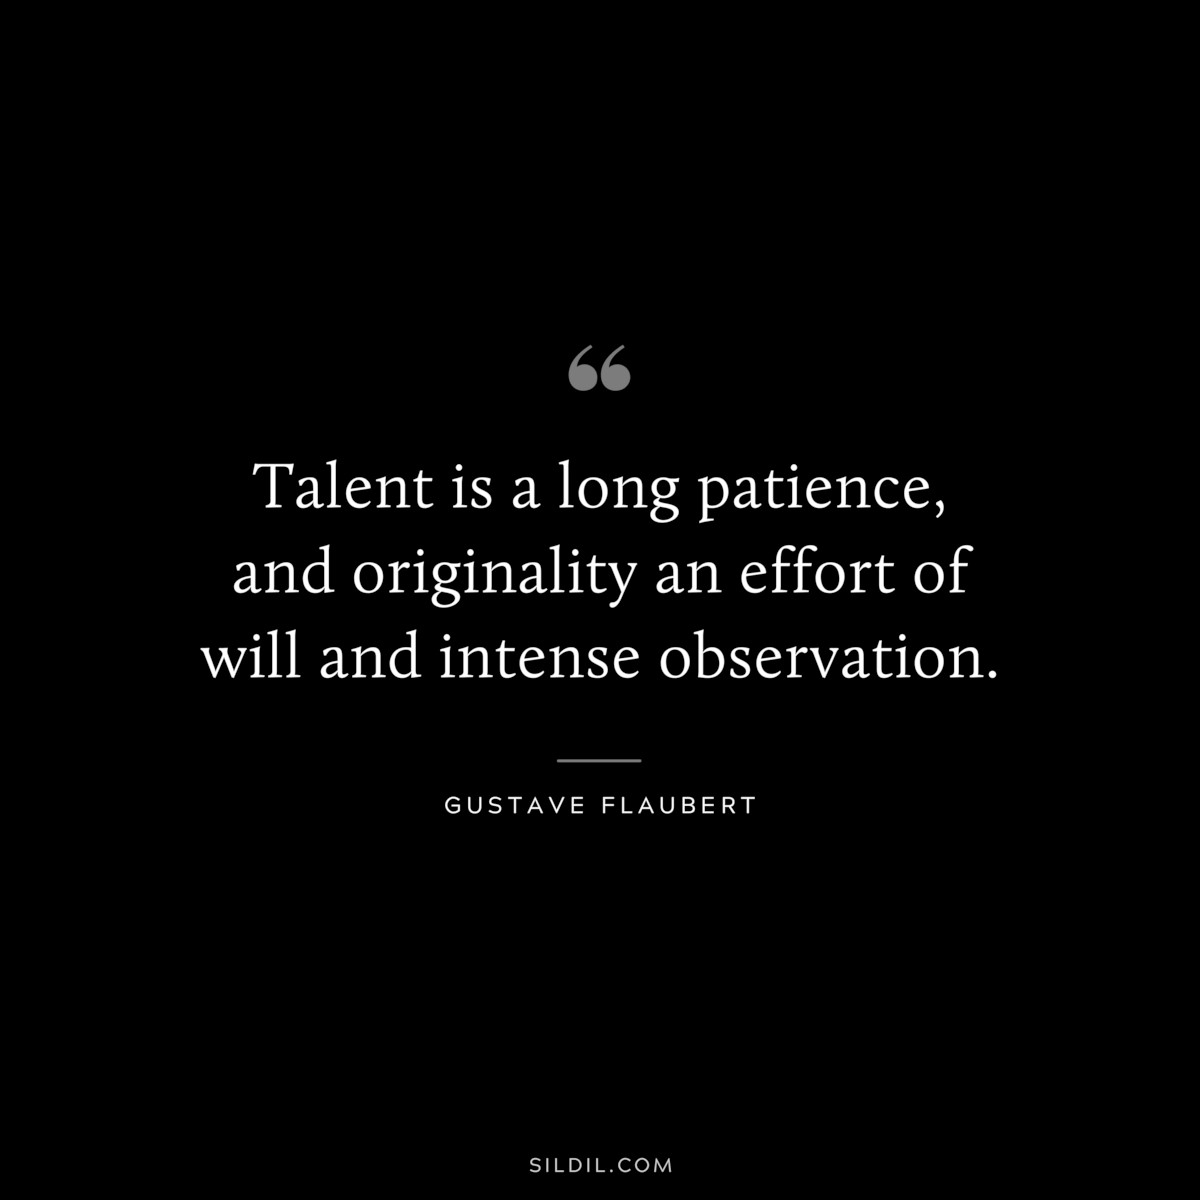 Talent is a long patience, and originality an effort of will and intense observation. ― Gustave Flaubert